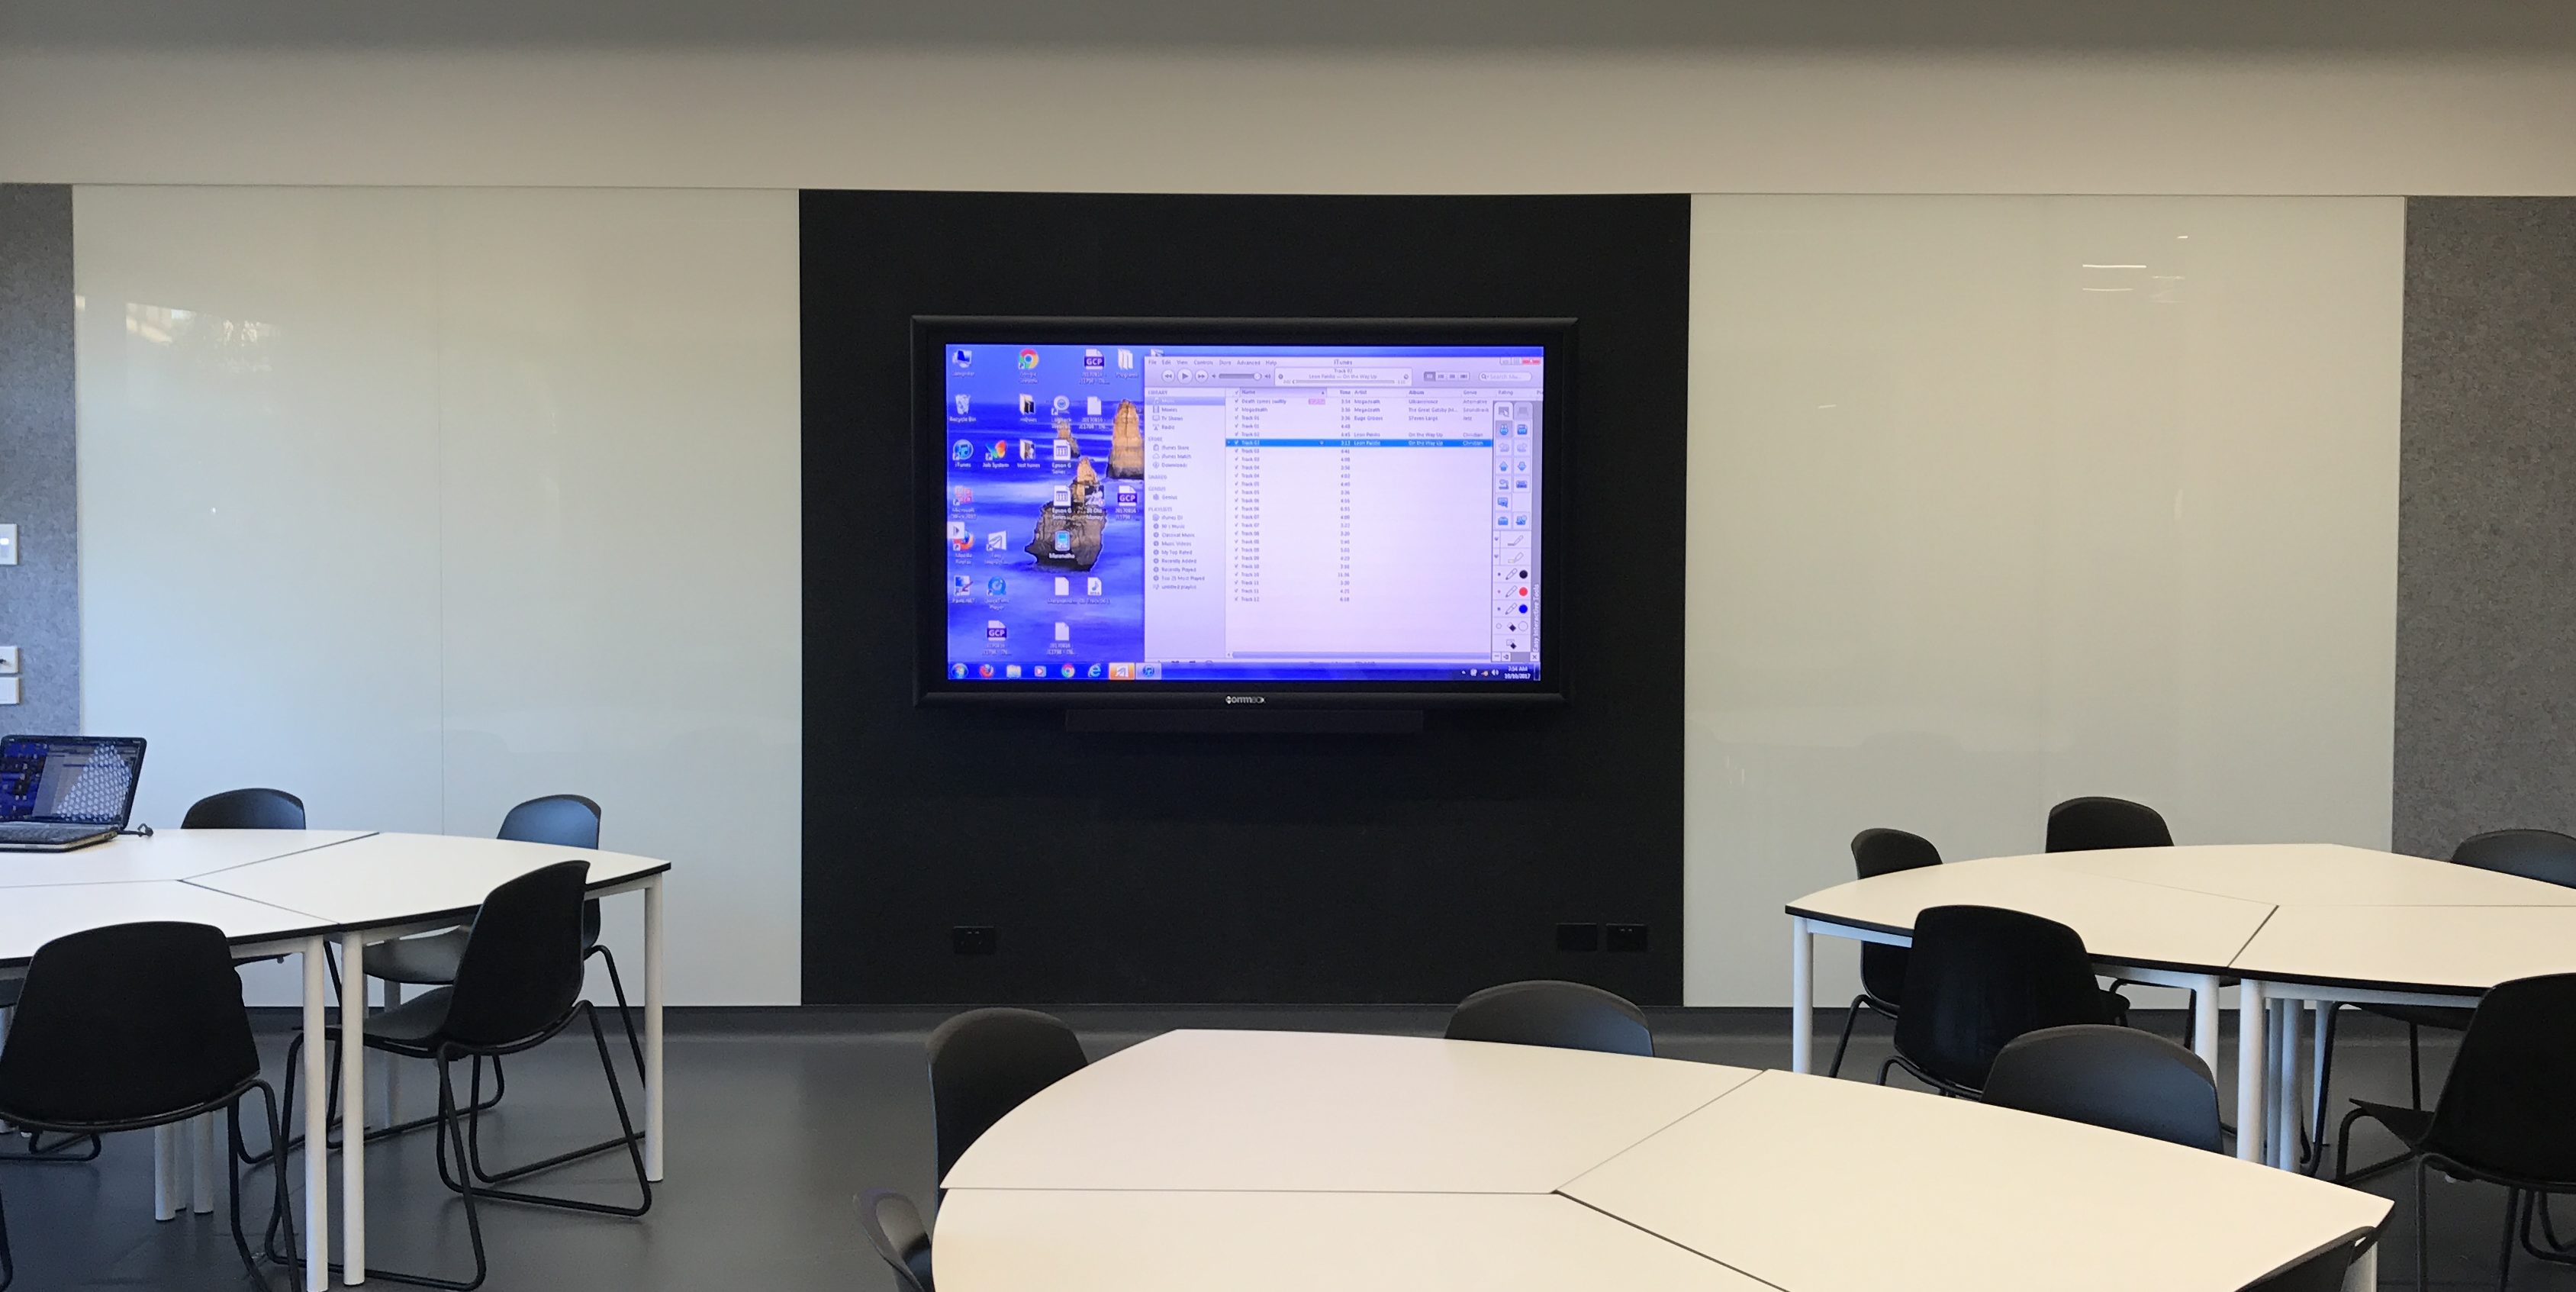 CommBox Classic Interactive 80" 4K Touch monitor at Caulfield Grammar School